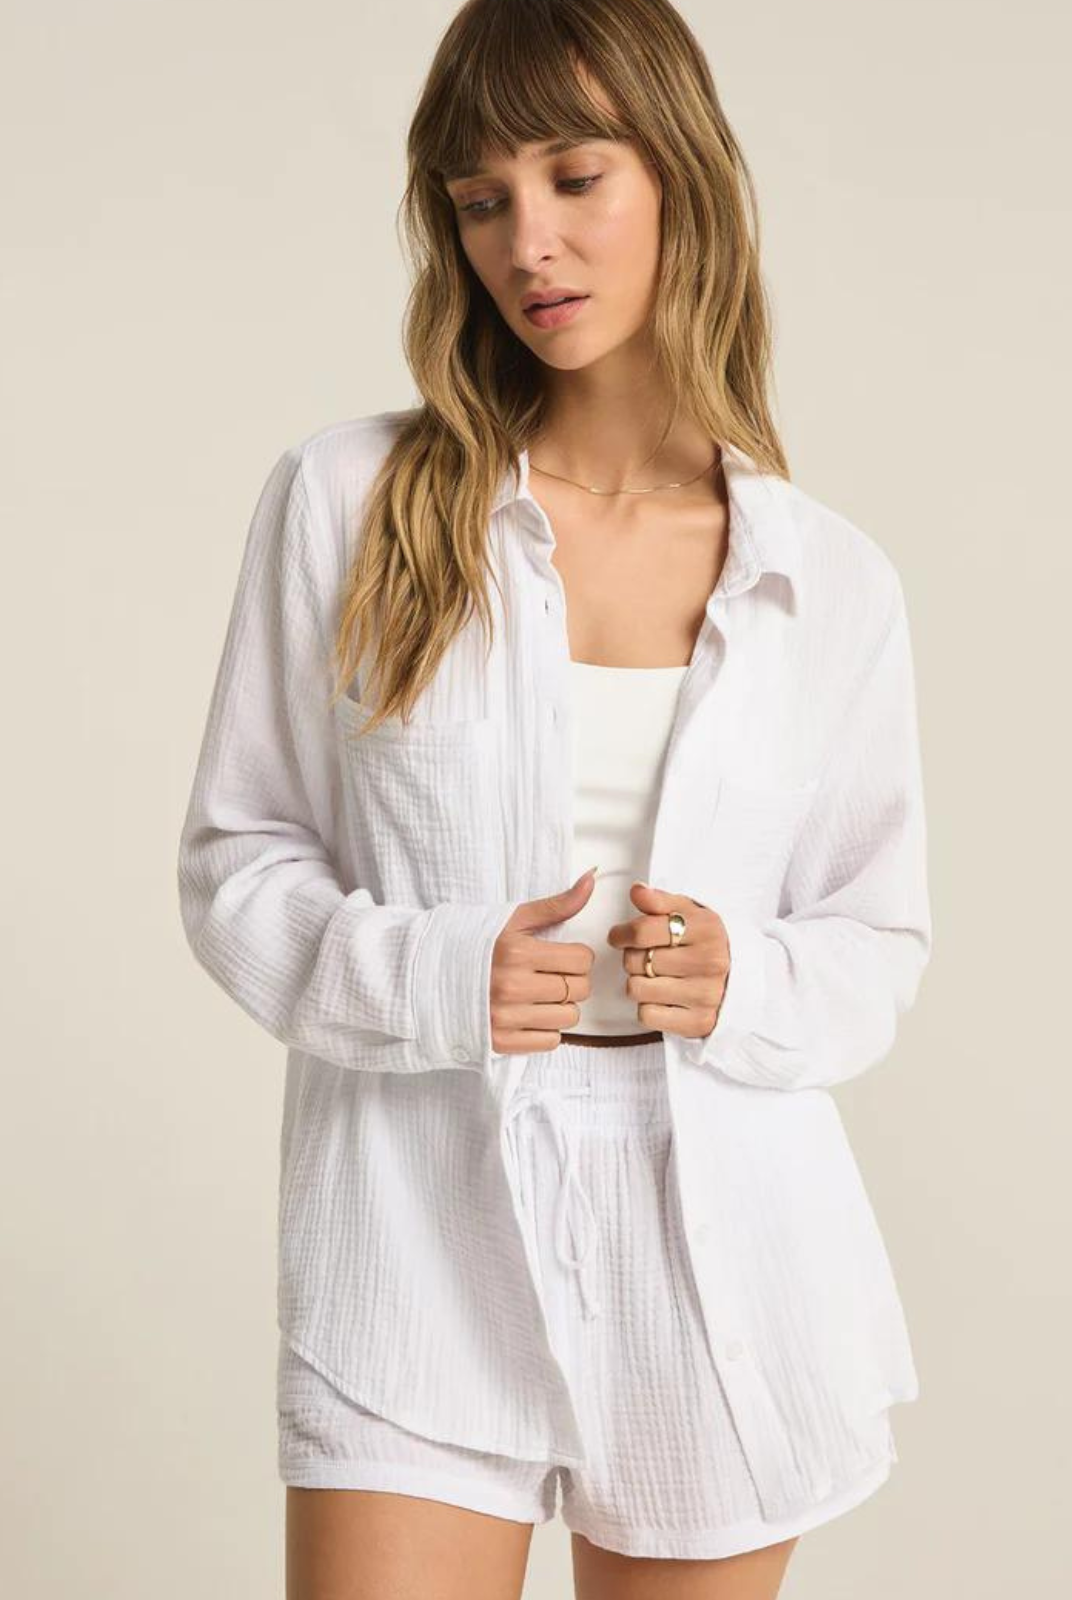 Z Supply Kaili Button Up Gauze Top- White. Meet the dressier side of gauze. This button up gauze top can be worn day to night, and features a relaxed fit with front pockets.